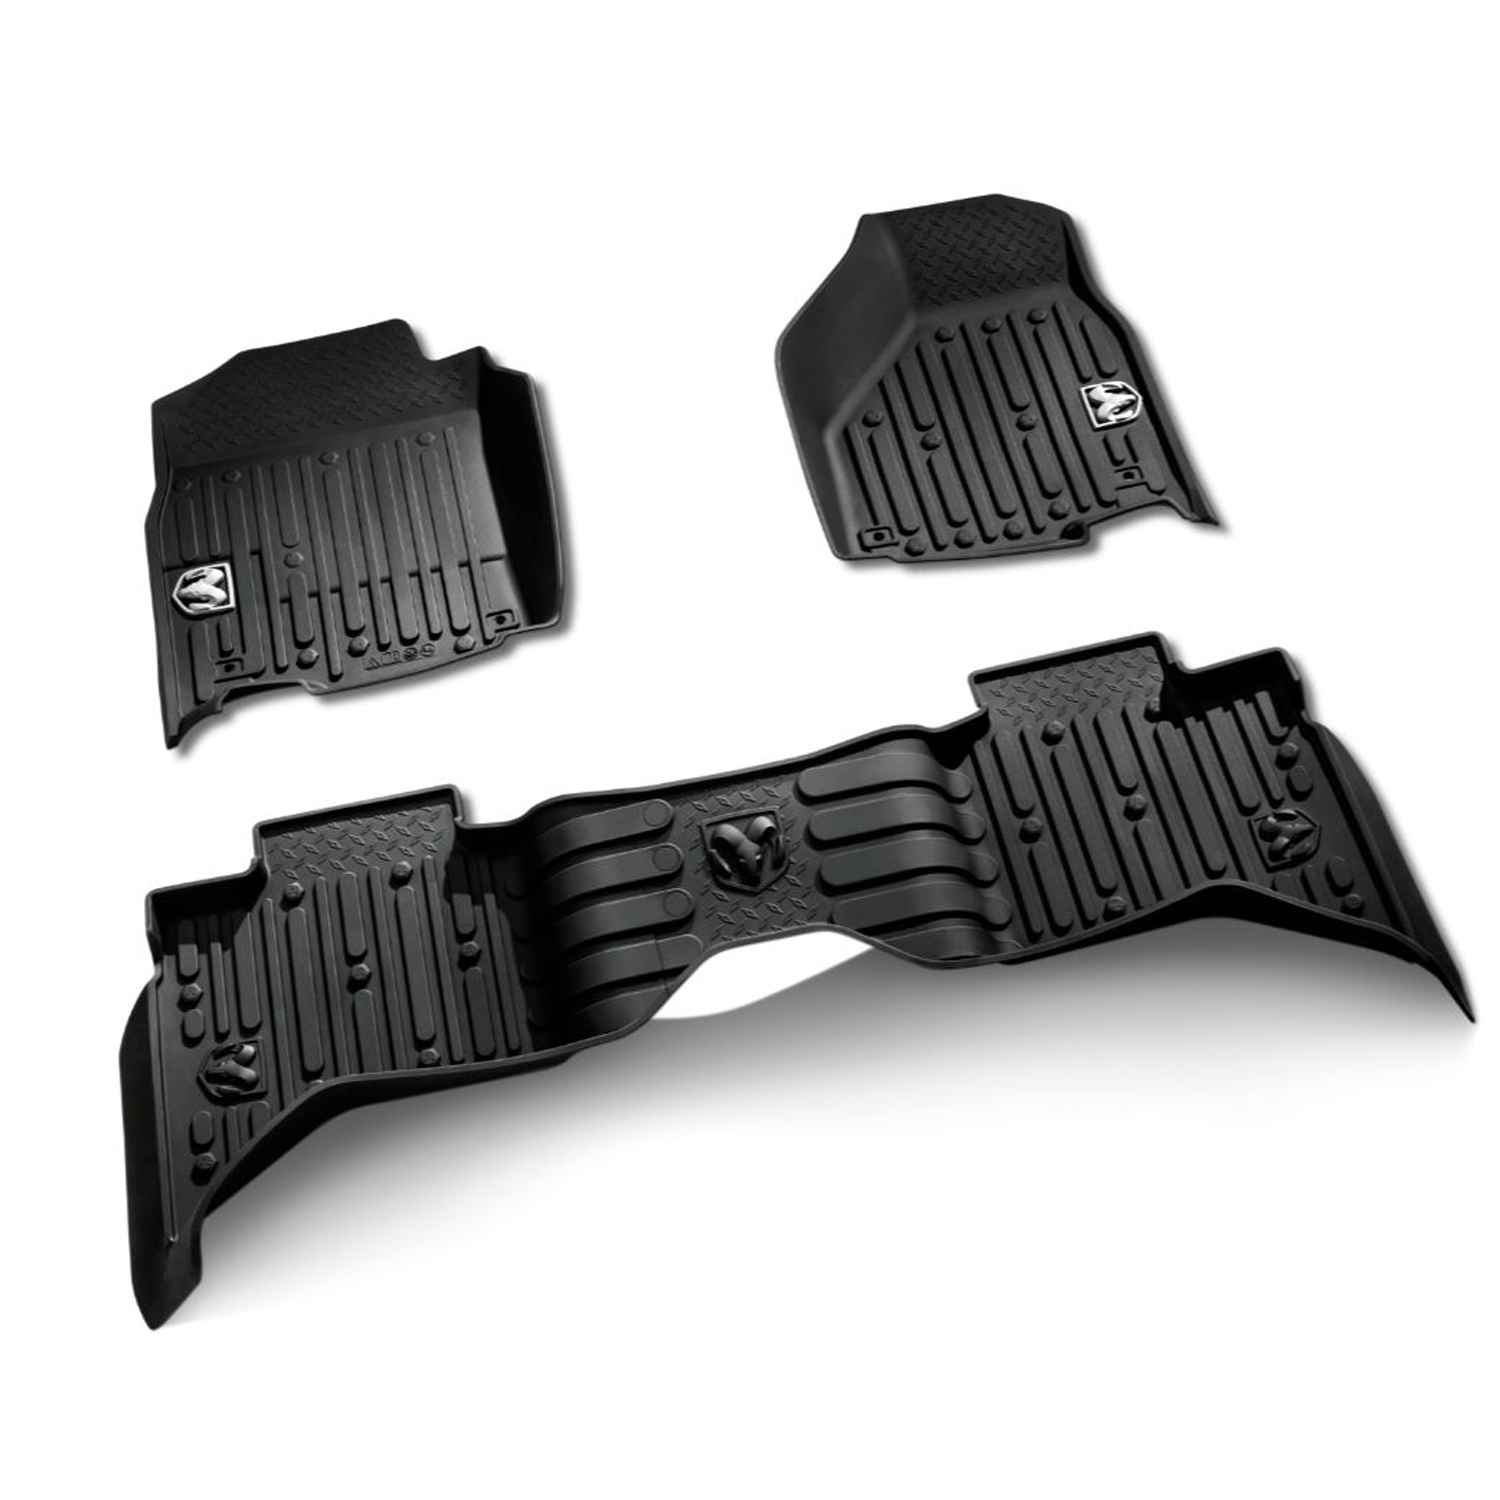 OEM 2016 Ram 4500 Chassis Cab All-weather Floor Mats, bucket-style, Regular Cab, Black (Part #82215579AB)